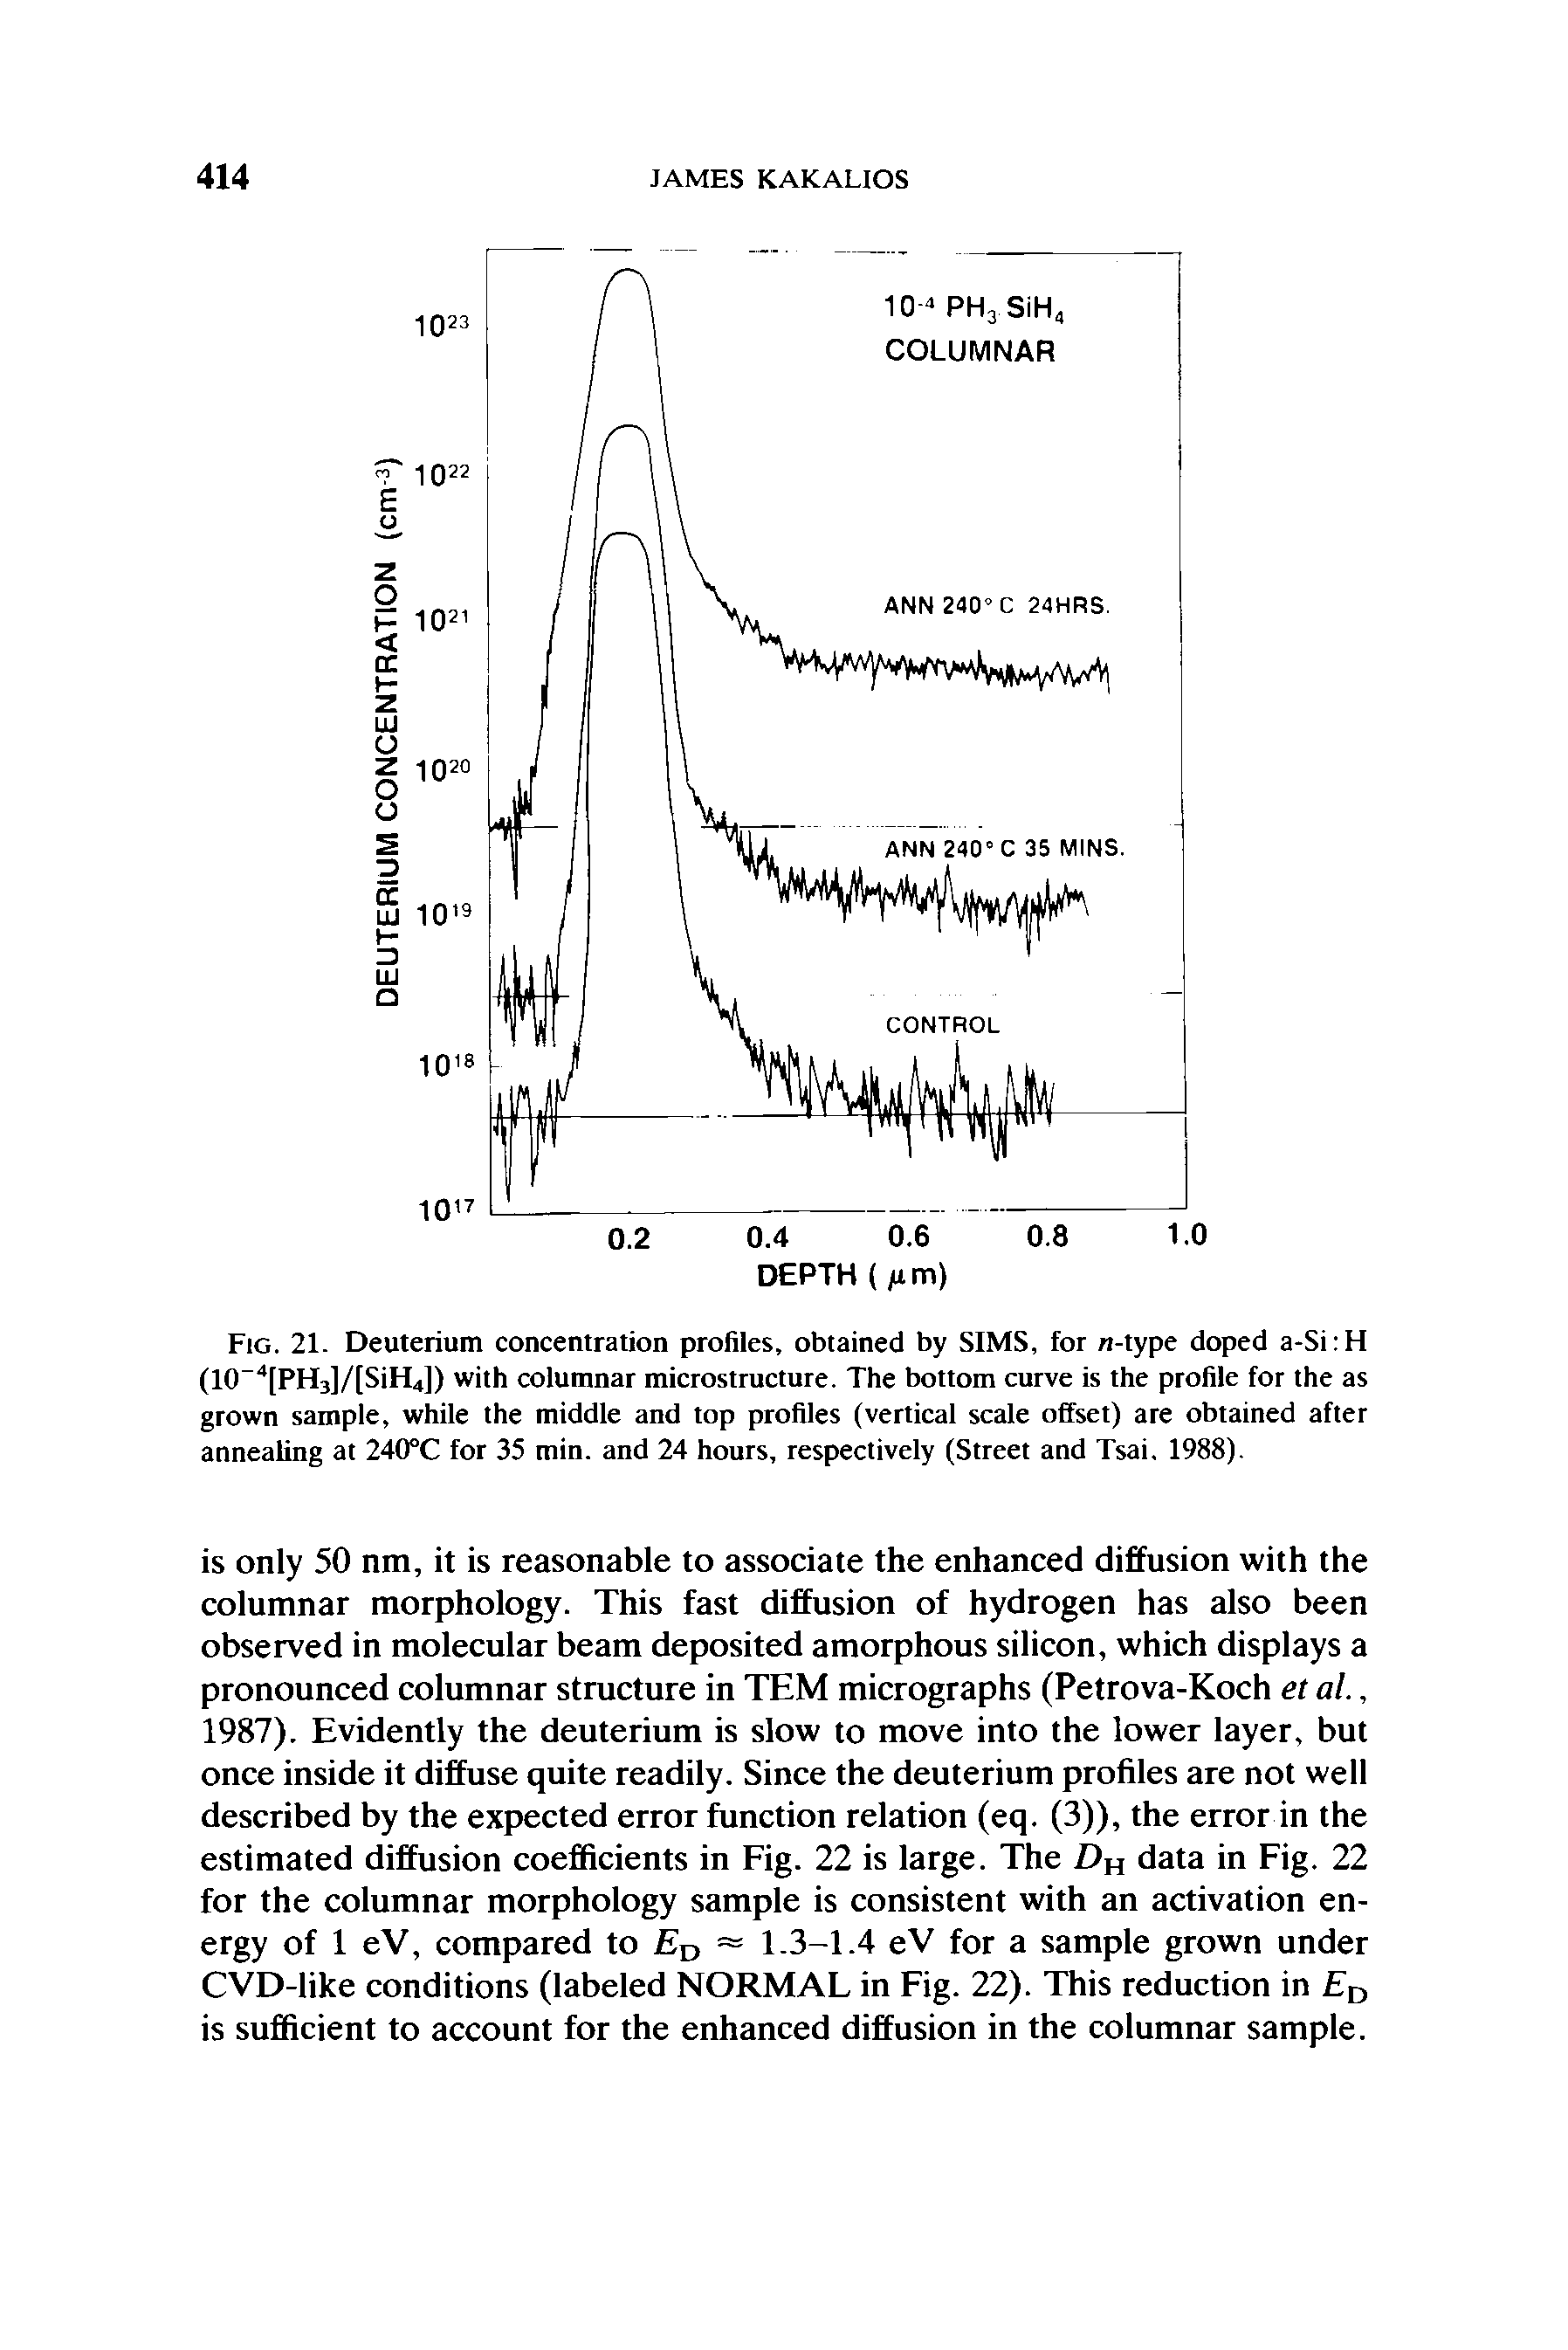 Fig. 21. Deuterium concentration profiles, obtained by SIMS, for n-type doped a-Si H (10 4[PH3]/[SiH4]) with columnar microstructure. The bottom curve is the profile for the as grown sample, while the middle and top profiles (vertical scale offset) are obtained after annealing at 240°C for 35 min. and 24 hours, respectively (Street and Tsai. 1988).